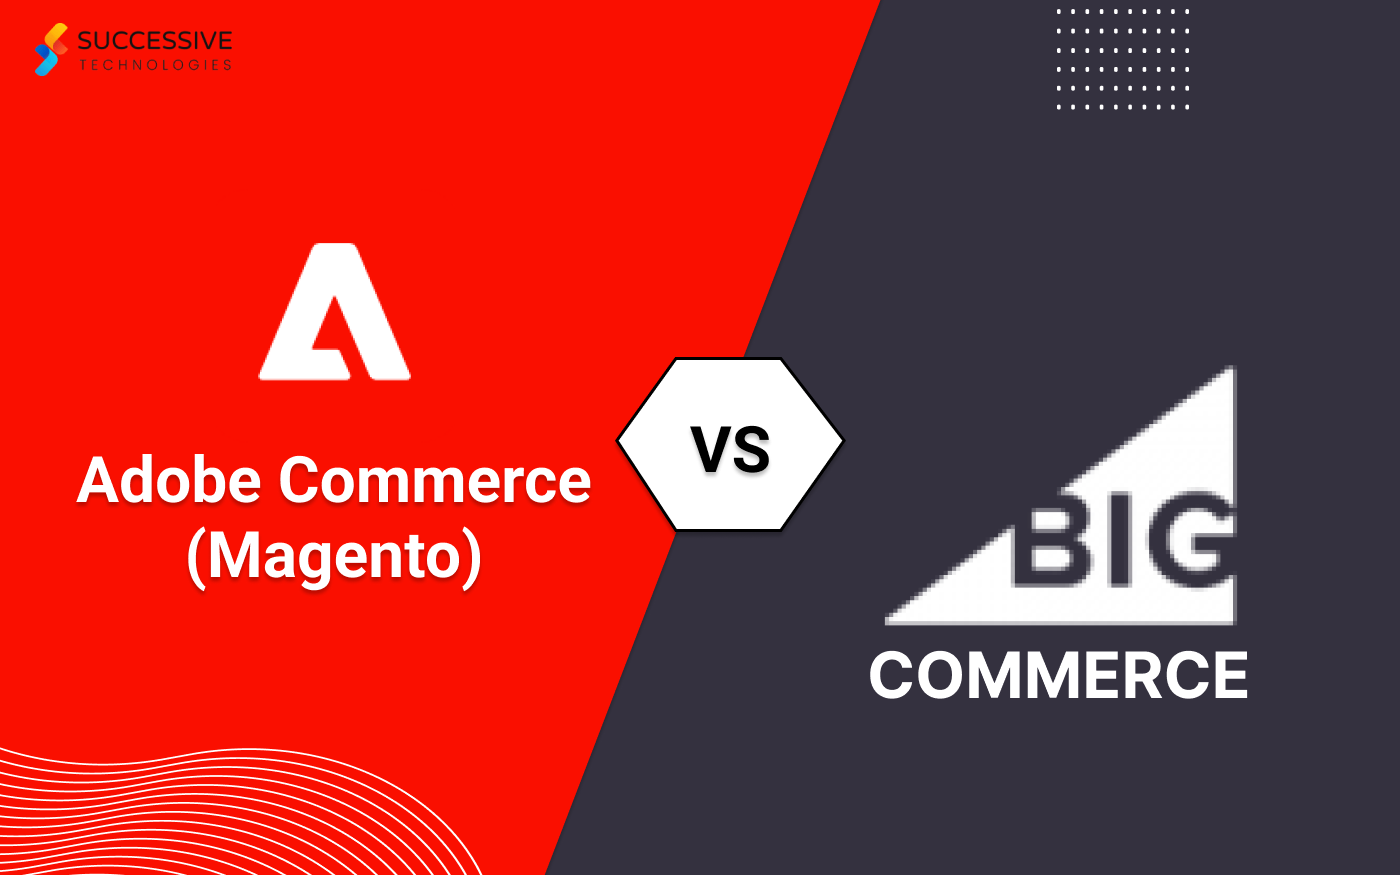 Adobe Commerce (Magento) vs BigCommerce: Which One to Choose?